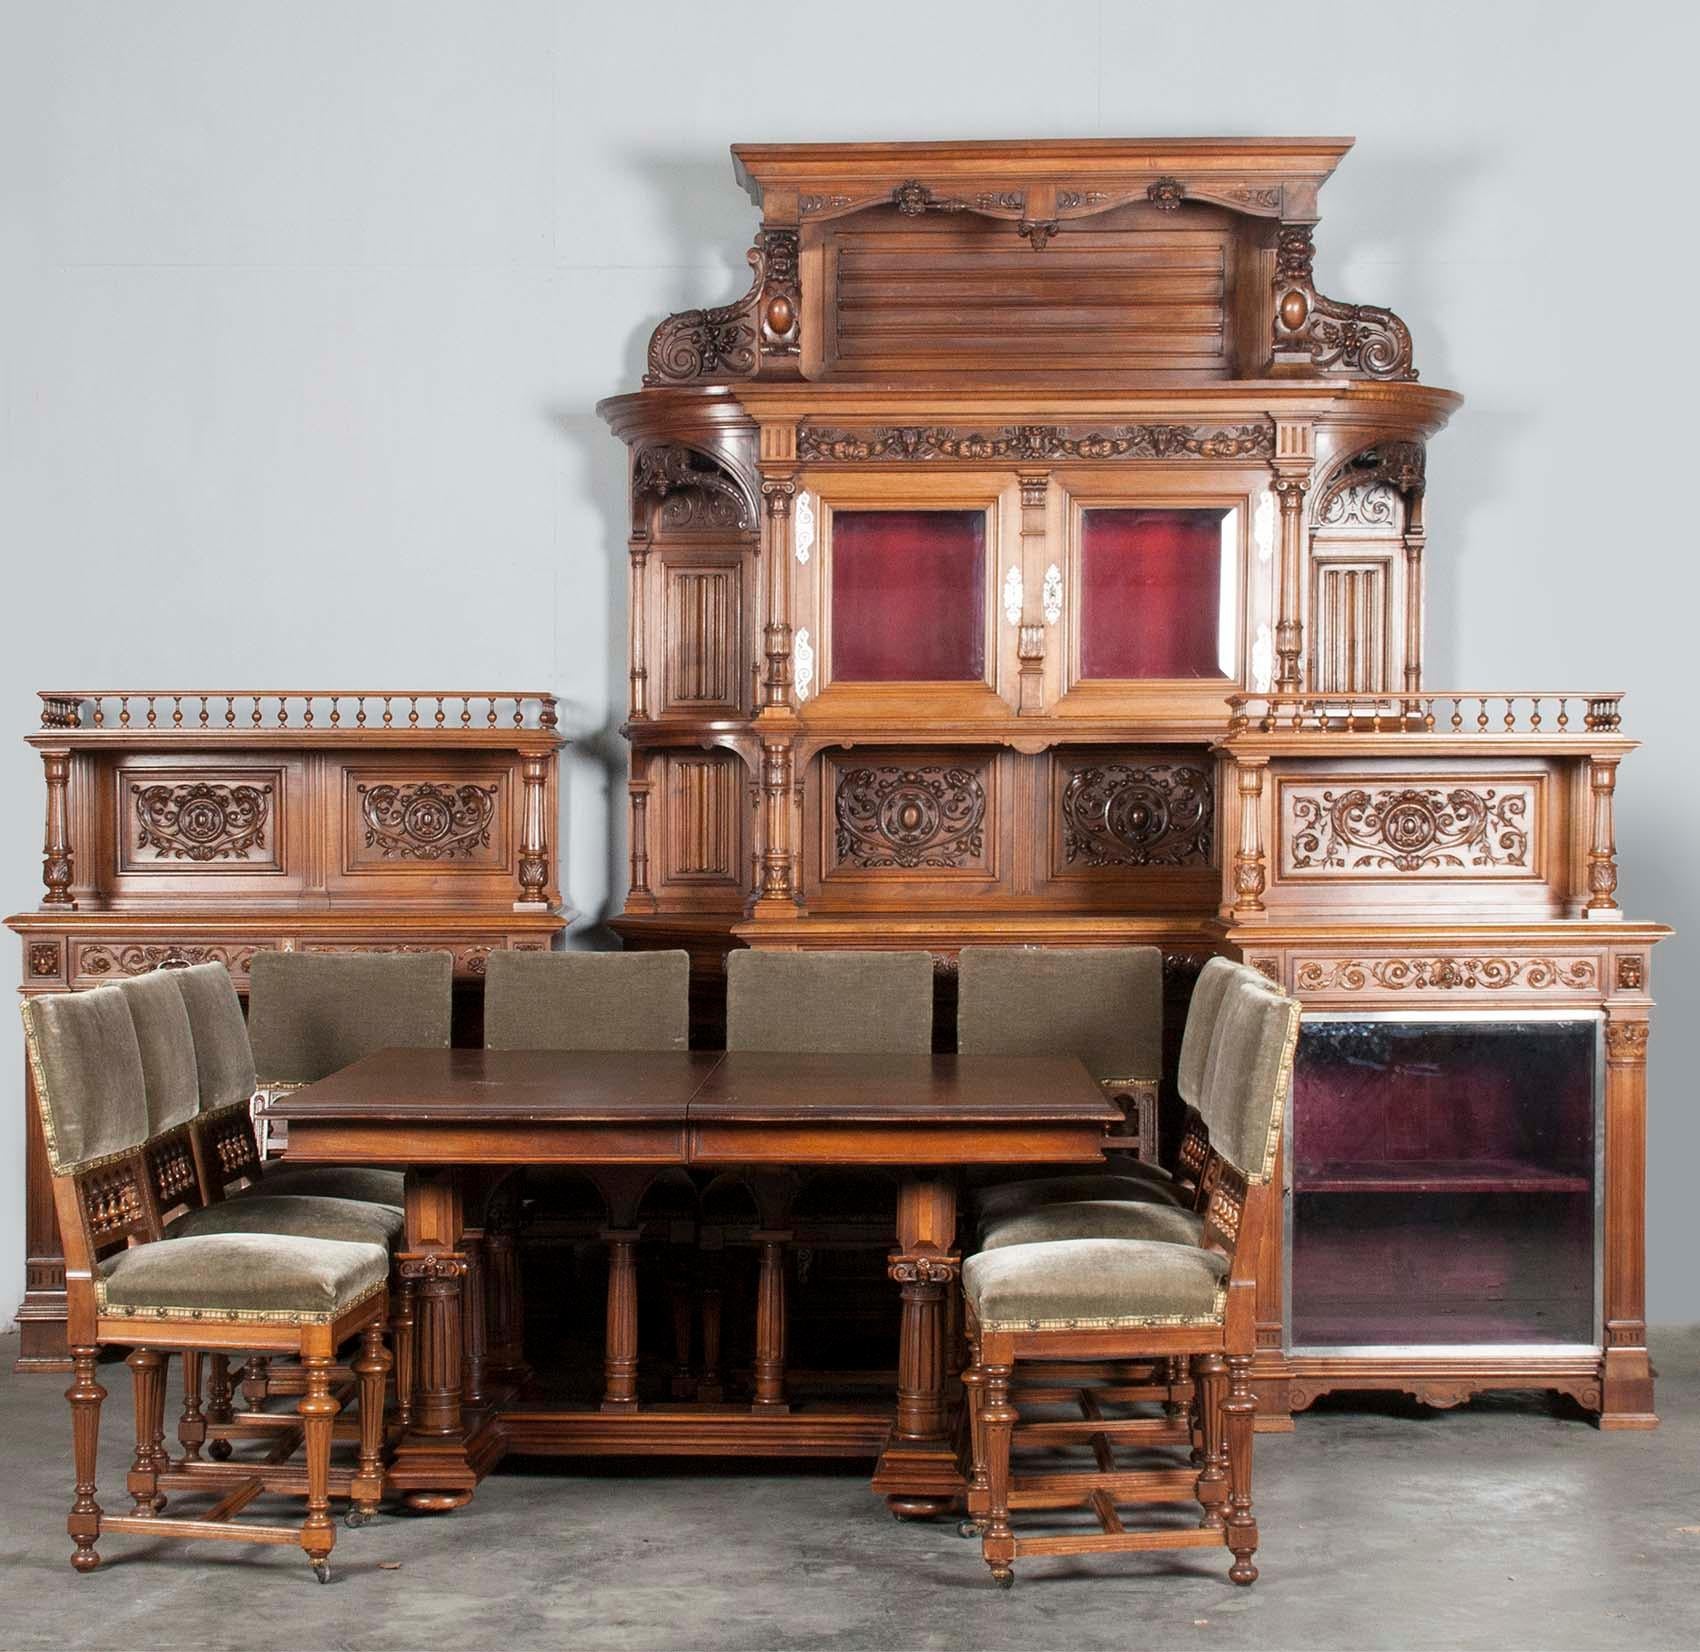 A French walnut Renaissance style dining suite. The dining room consists of: Buffet cupboard, server cabinet, silver cabinet, table and 10 chairs. Hand carved from solid walnut in Renaissance style. Richly ornamented with Gothic panels, lion heads